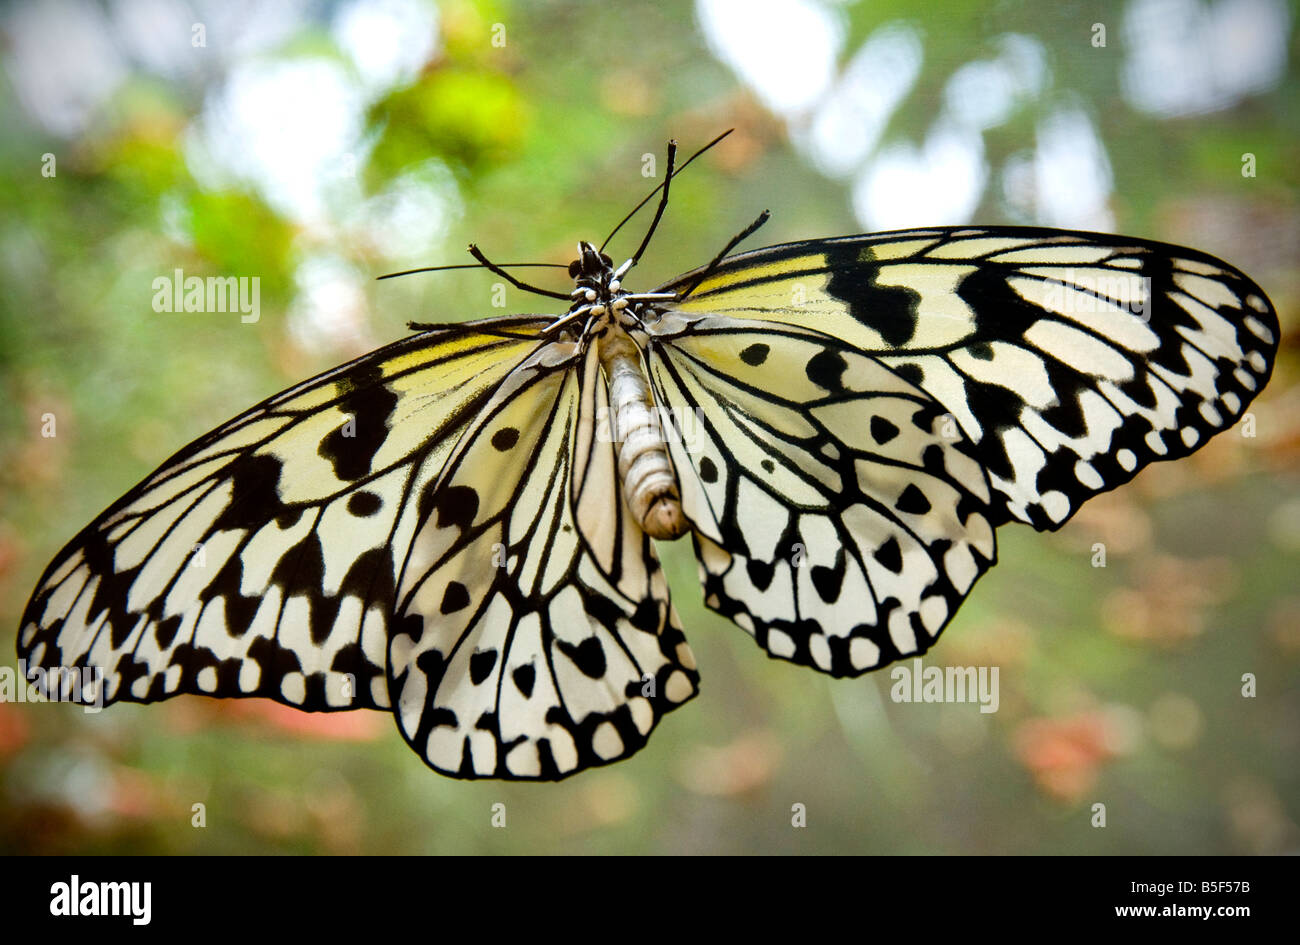 PAPER KITE Butterfly white tree nymph Idea leuconoe, paper kite, rice paper tropical, with wings spread in lush habitat Stock Photo